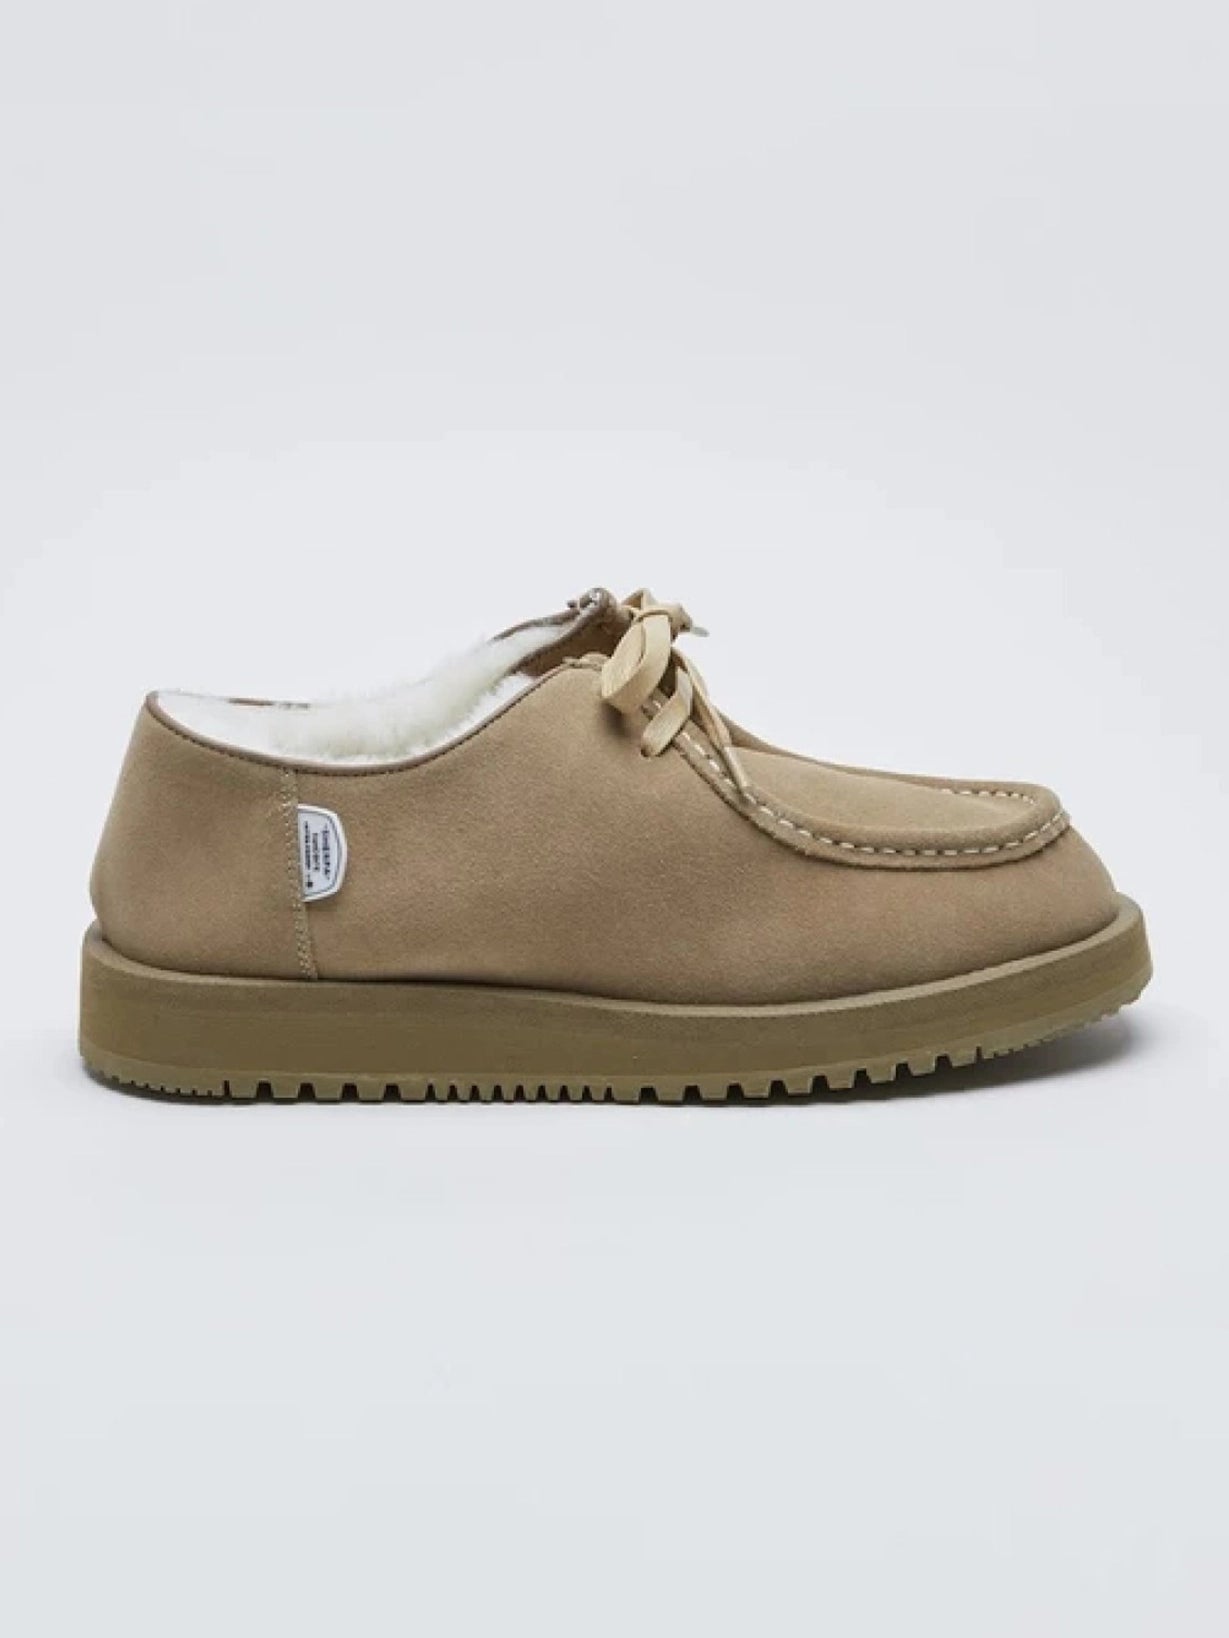 Suicoke - Chaussures Derby DYS Mwpab - Taupe